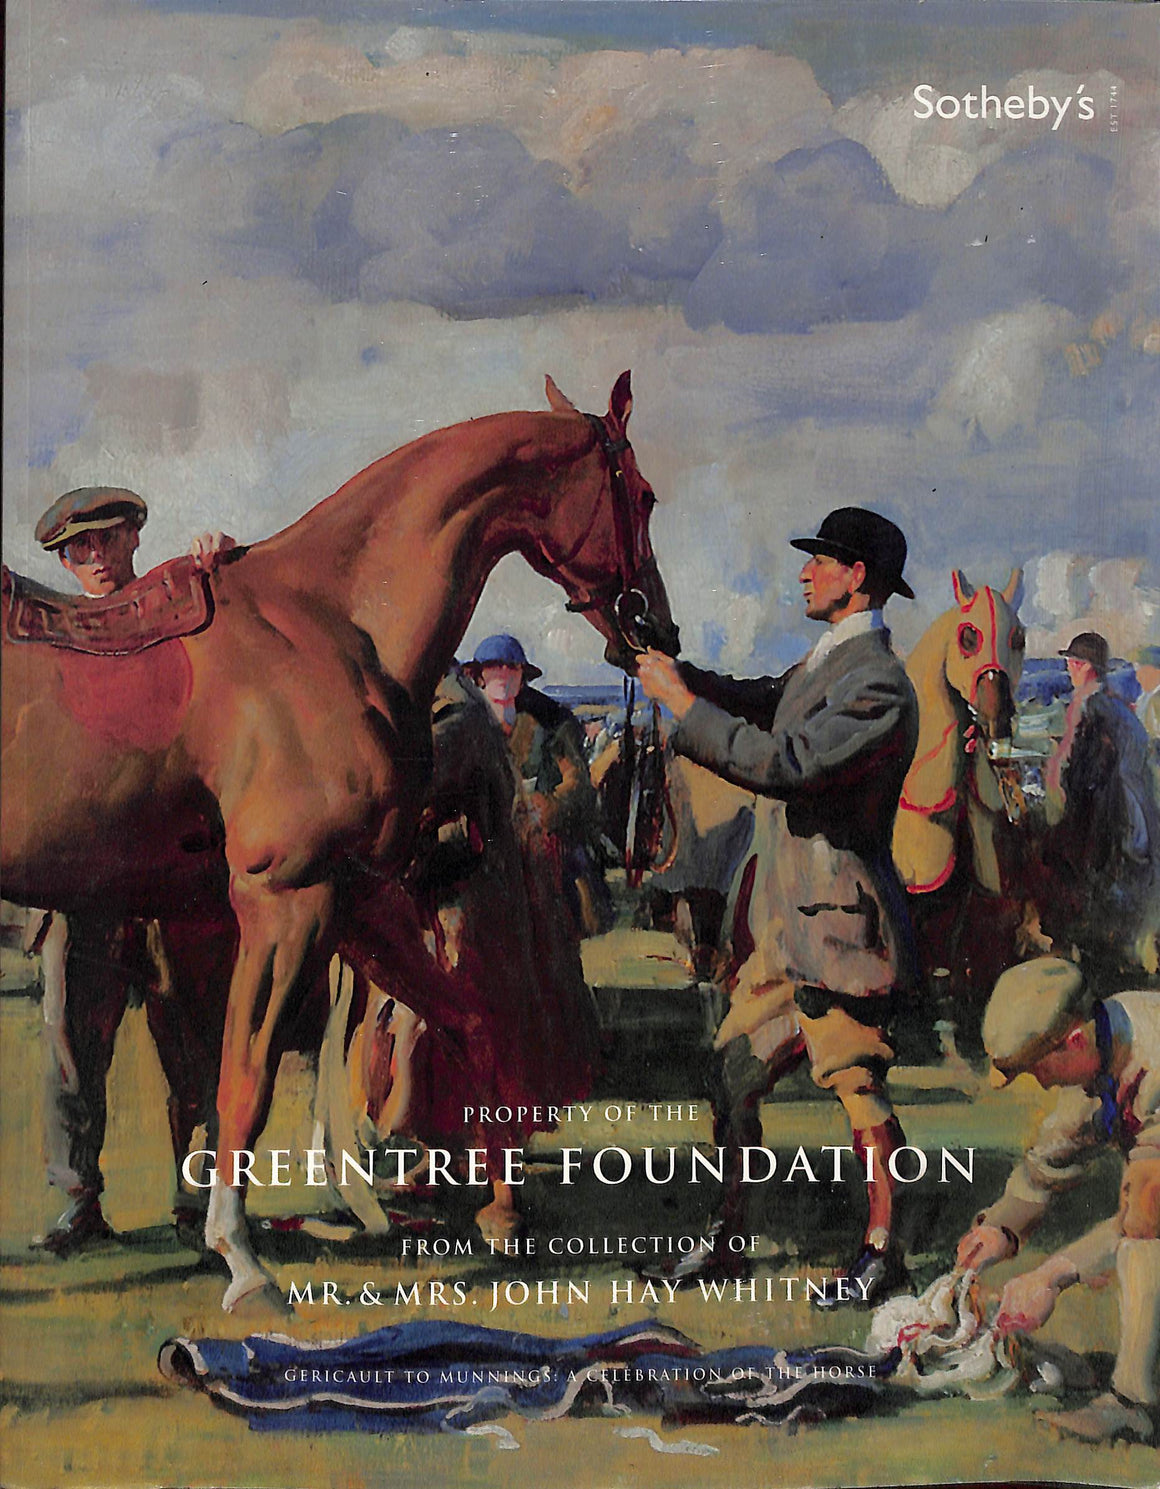 Property Of The Greentree Foundation From The Collection Of Mr. & Mrs. John Hay Whitney Gericault to Munnings: A Celebration of the Horse. New York May 5, London June 10, 2004.